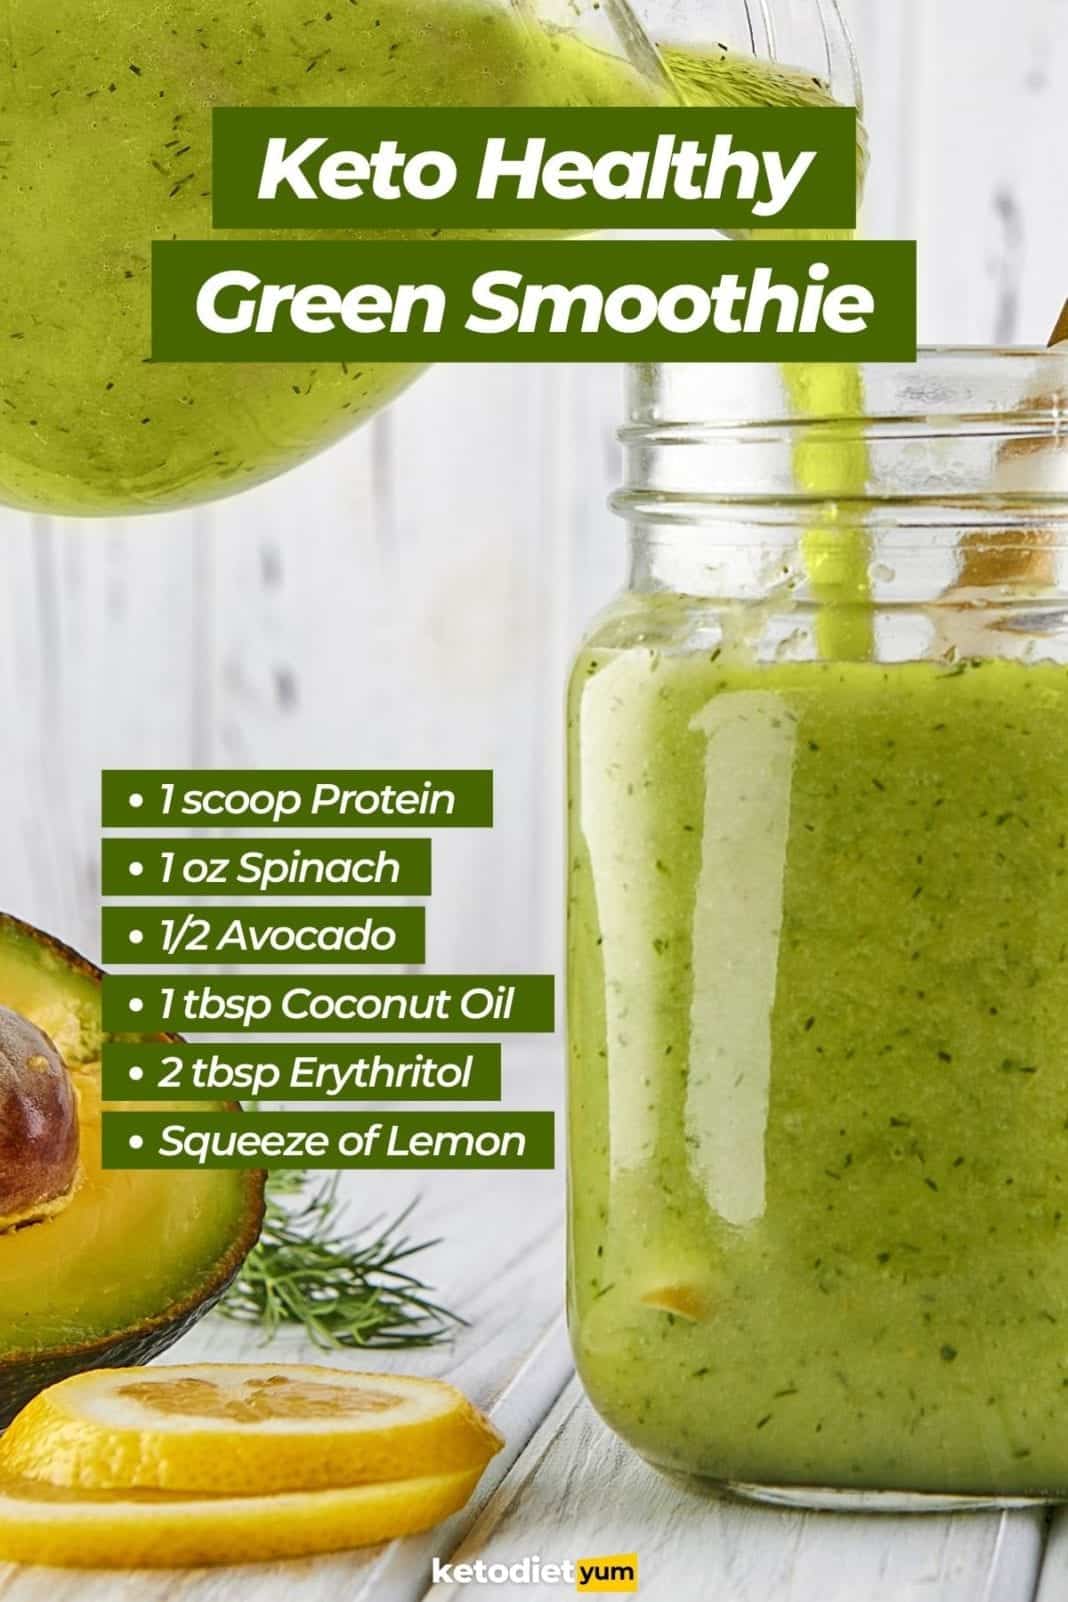 Keto Smoothies For Weight Loss: 6 Top Low-Carb Smoothies